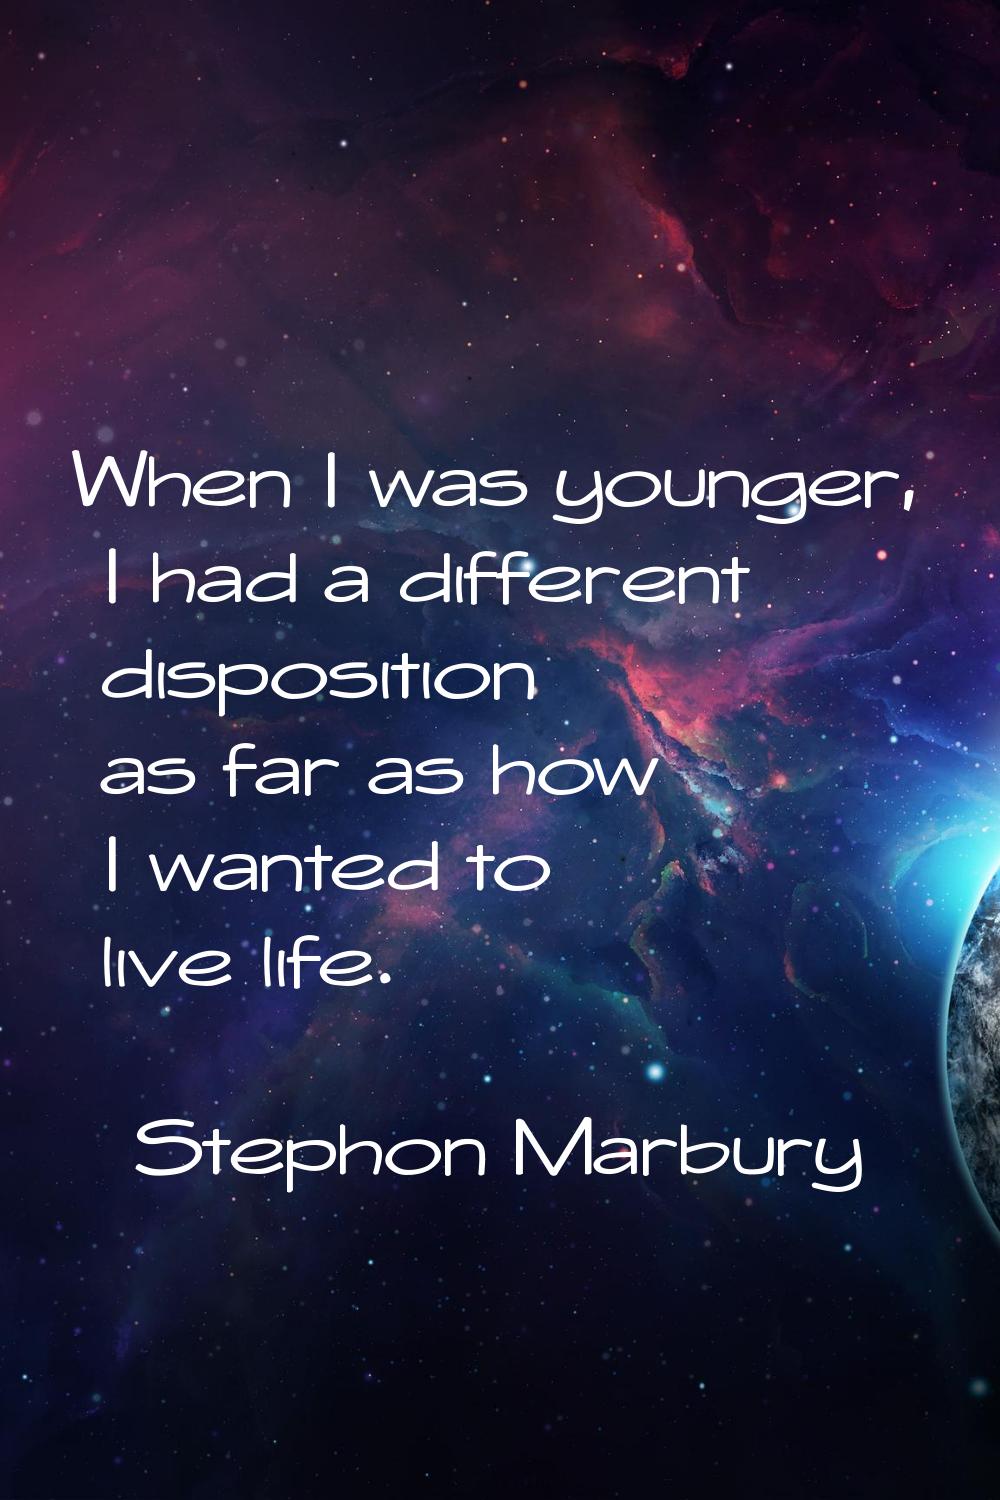 When I was younger, I had a different disposition as far as how I wanted to live life.